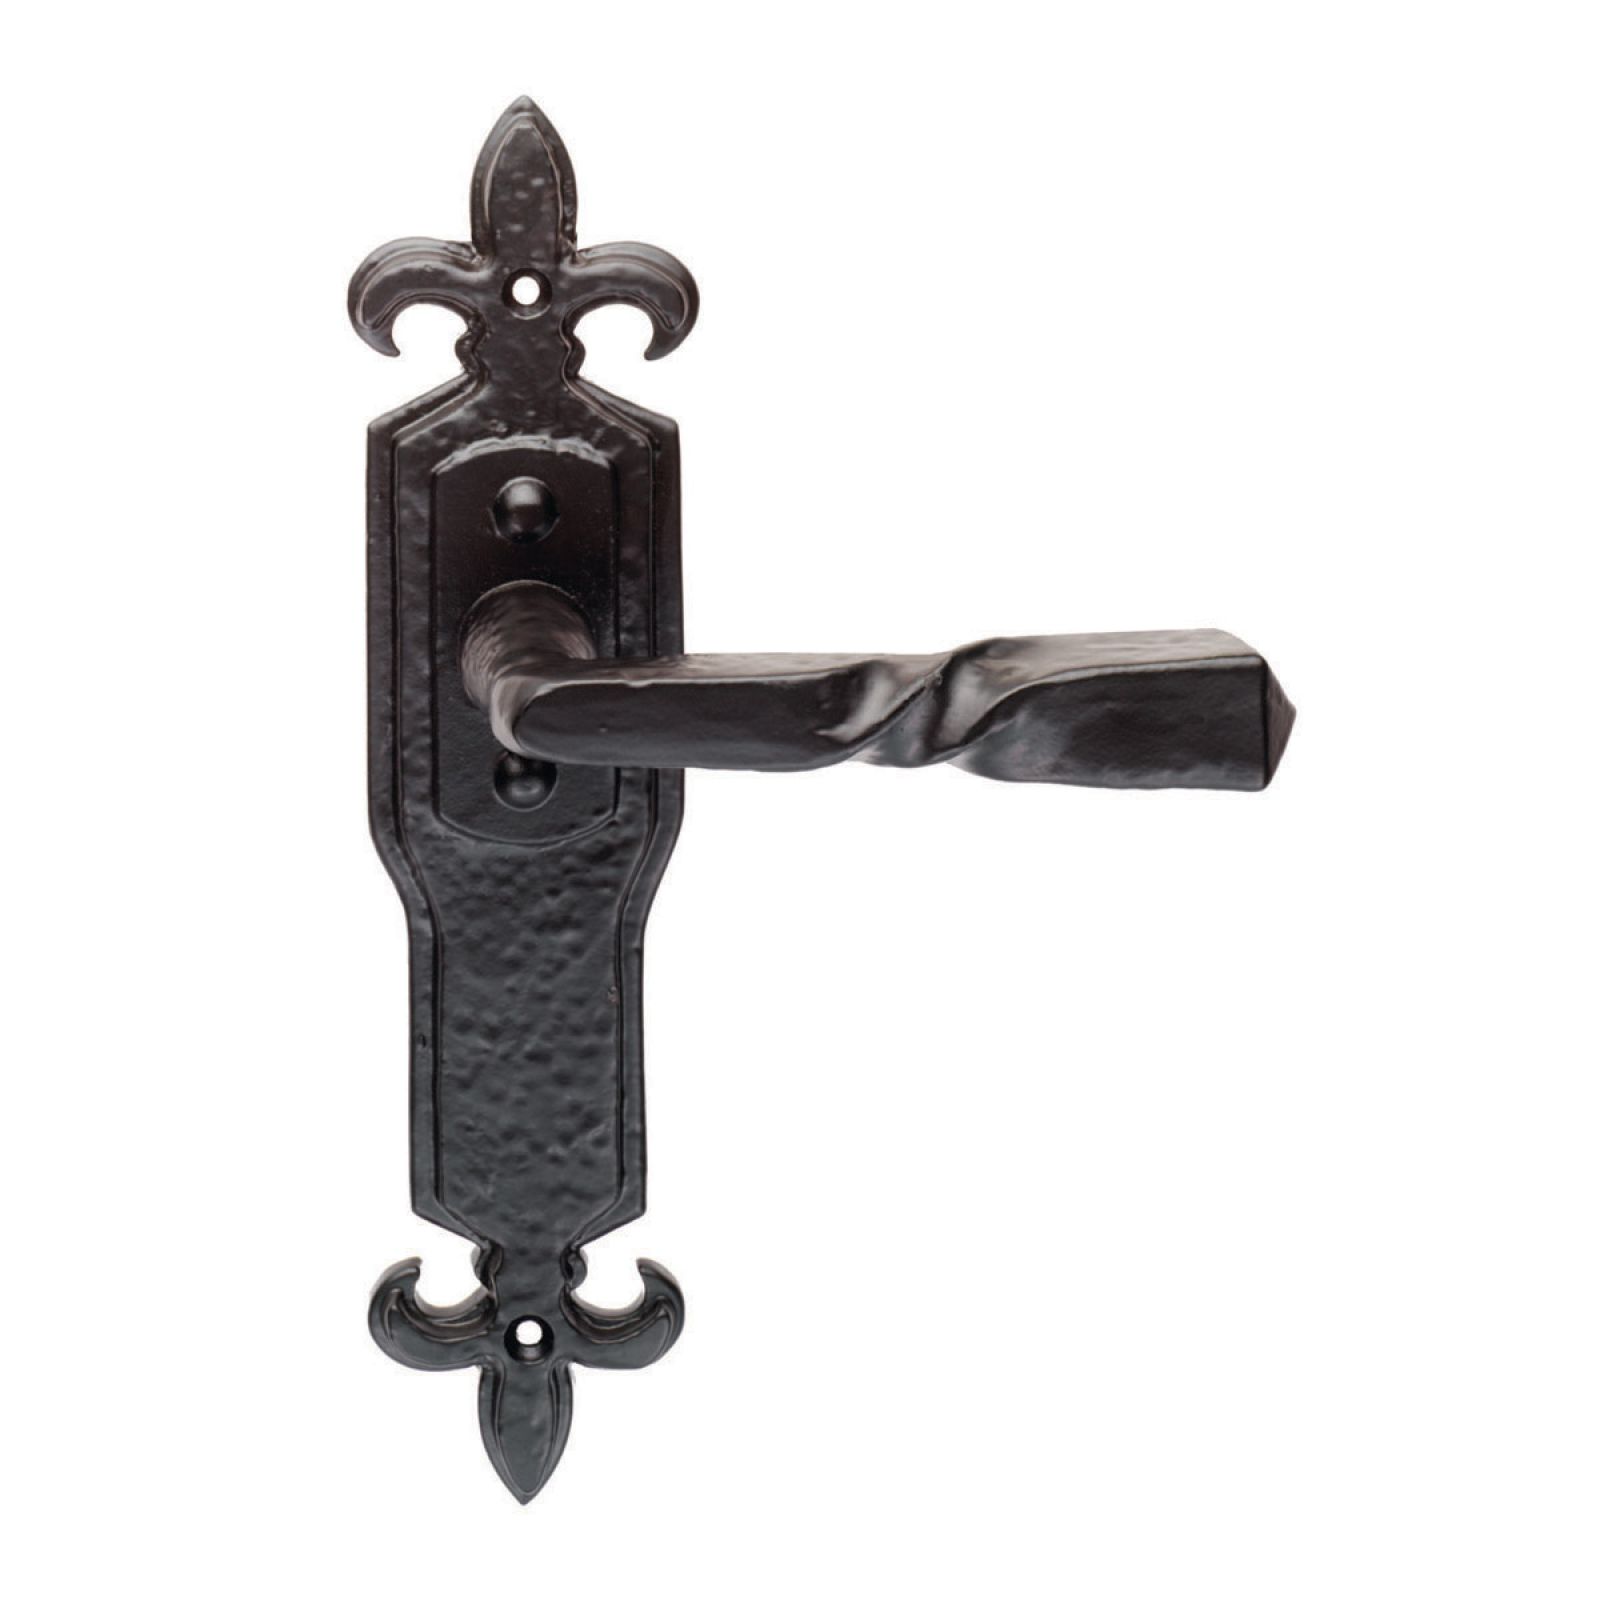 Narrow plate lever on gothic style latch back plate